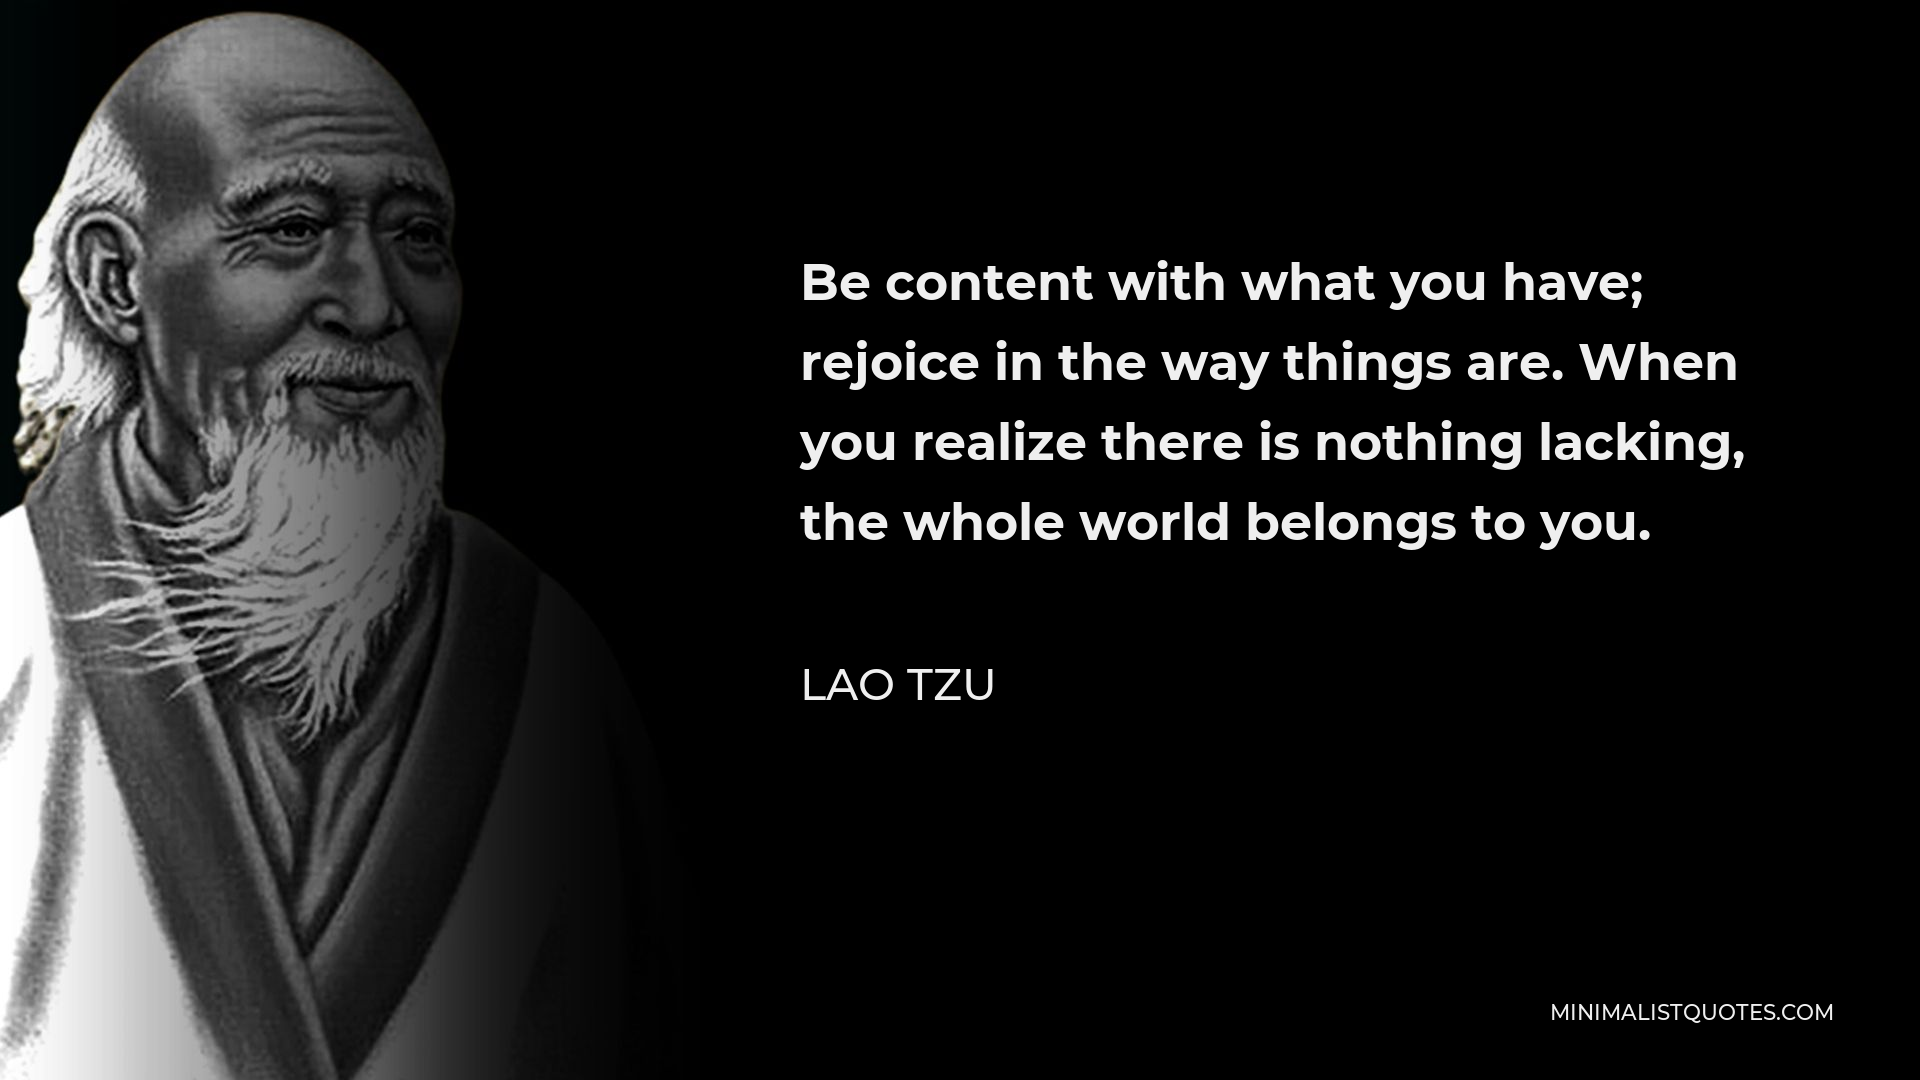 Lao Tzu Quote - Be content with what you have; rejoice in the way things are. When you realize there is nothing lacking, the whole world belongs to you.